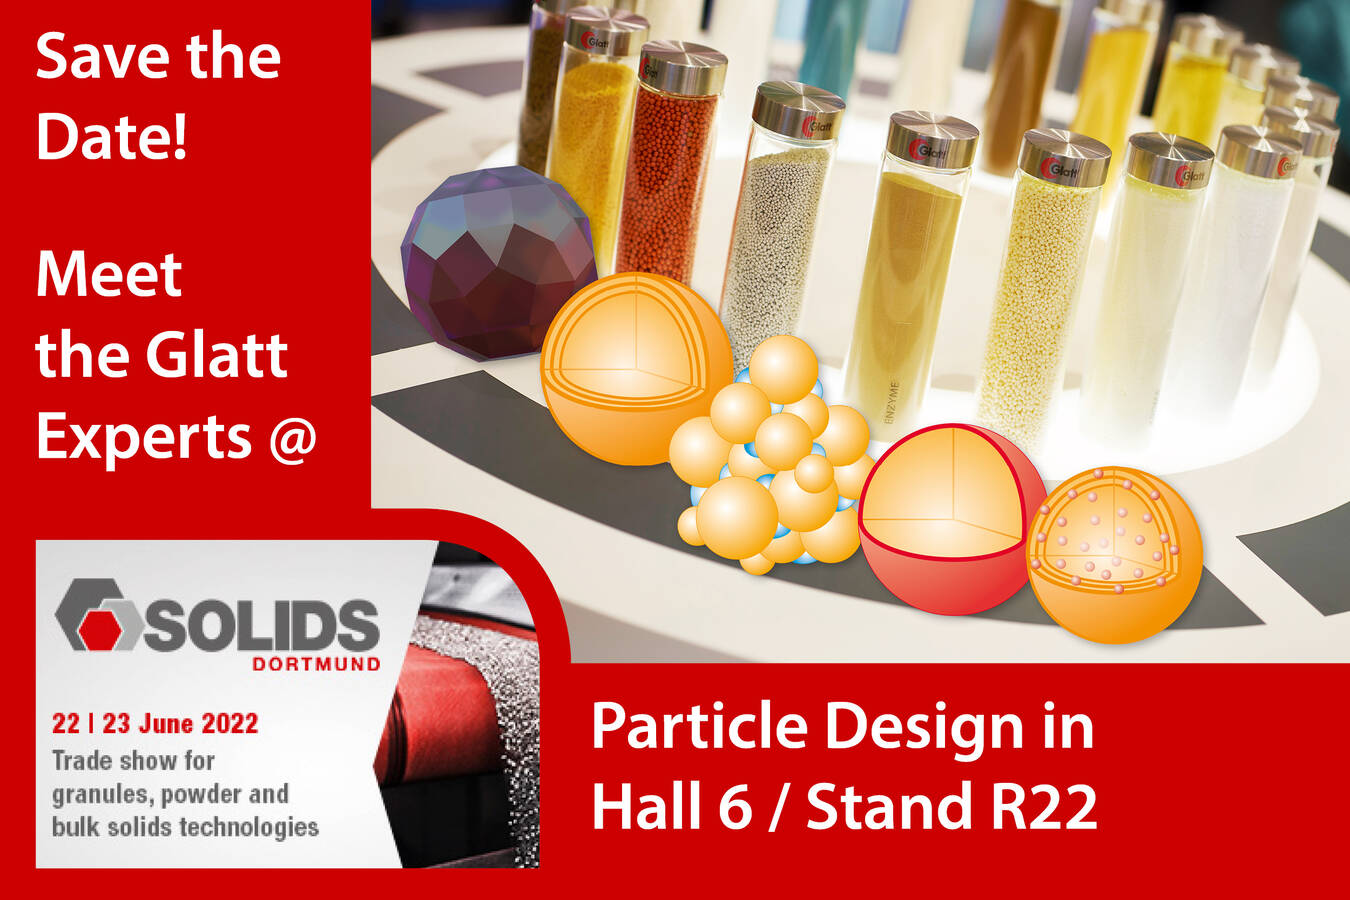 Visit us at booth R22 in hall 6 of Solds 2022 in Dortmund, Germany